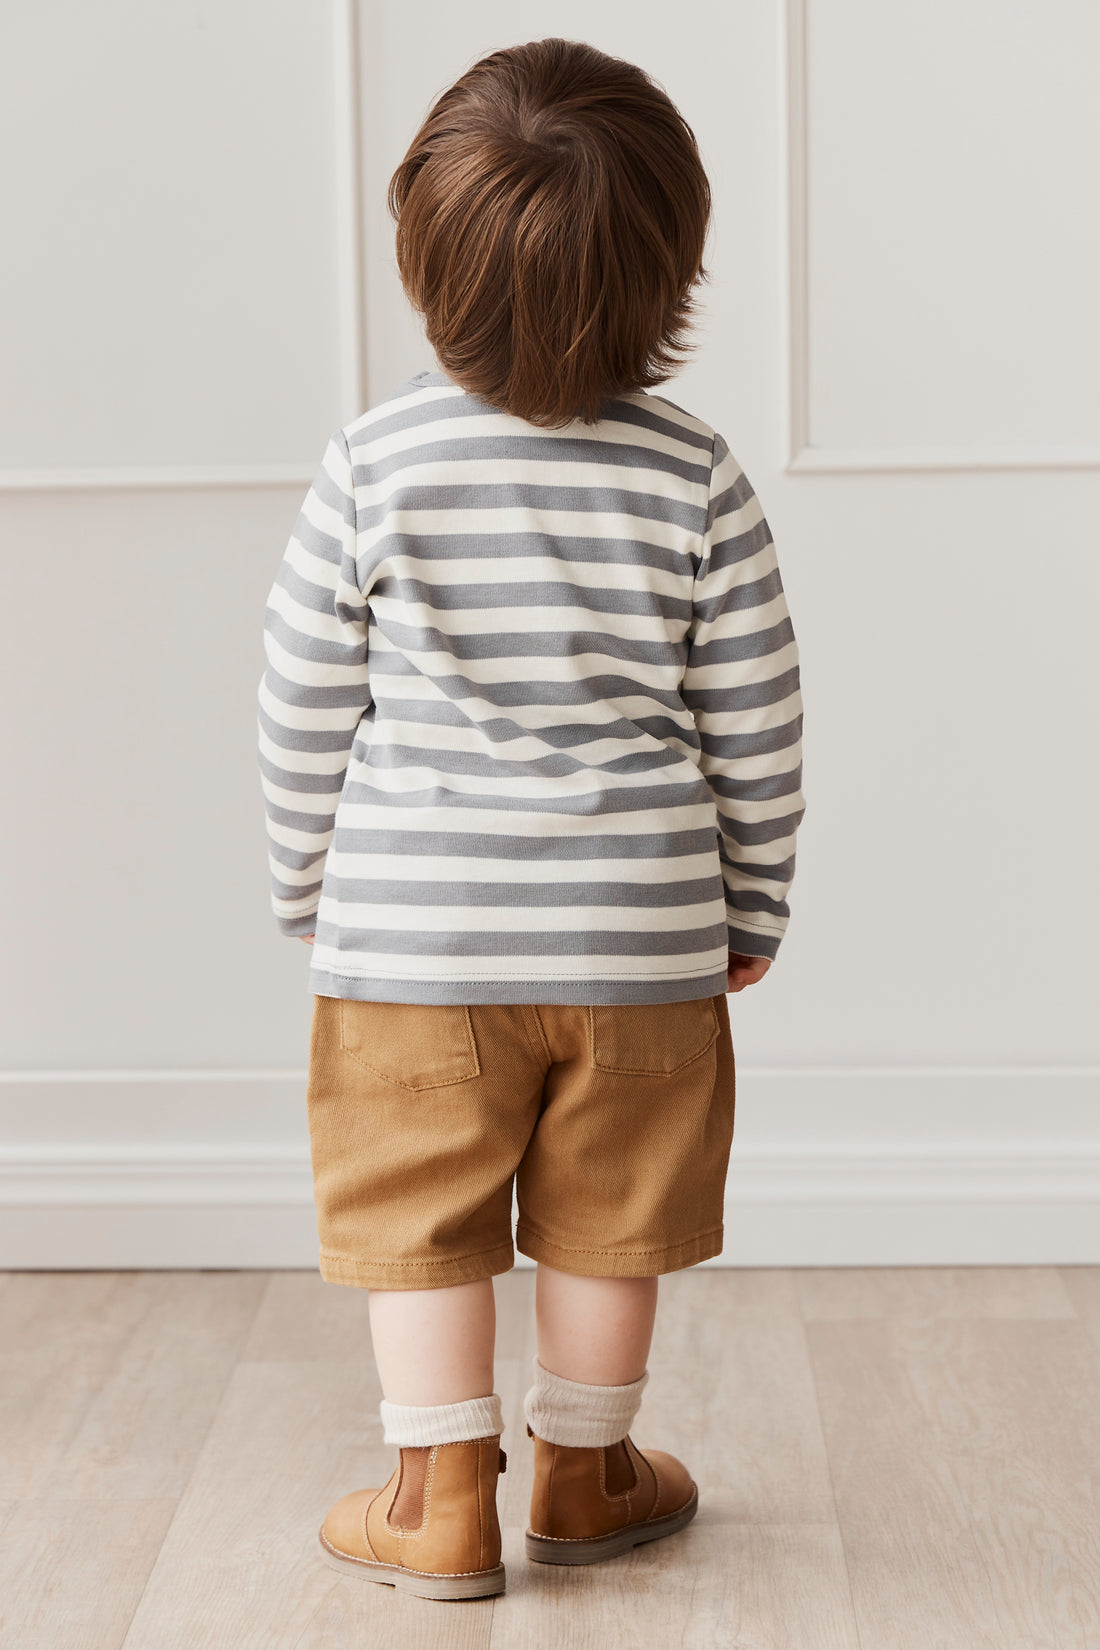 Pima Cotton Vinny Long Sleeve Top - Olive Stripe Childrens Top from Jamie Kay NZ